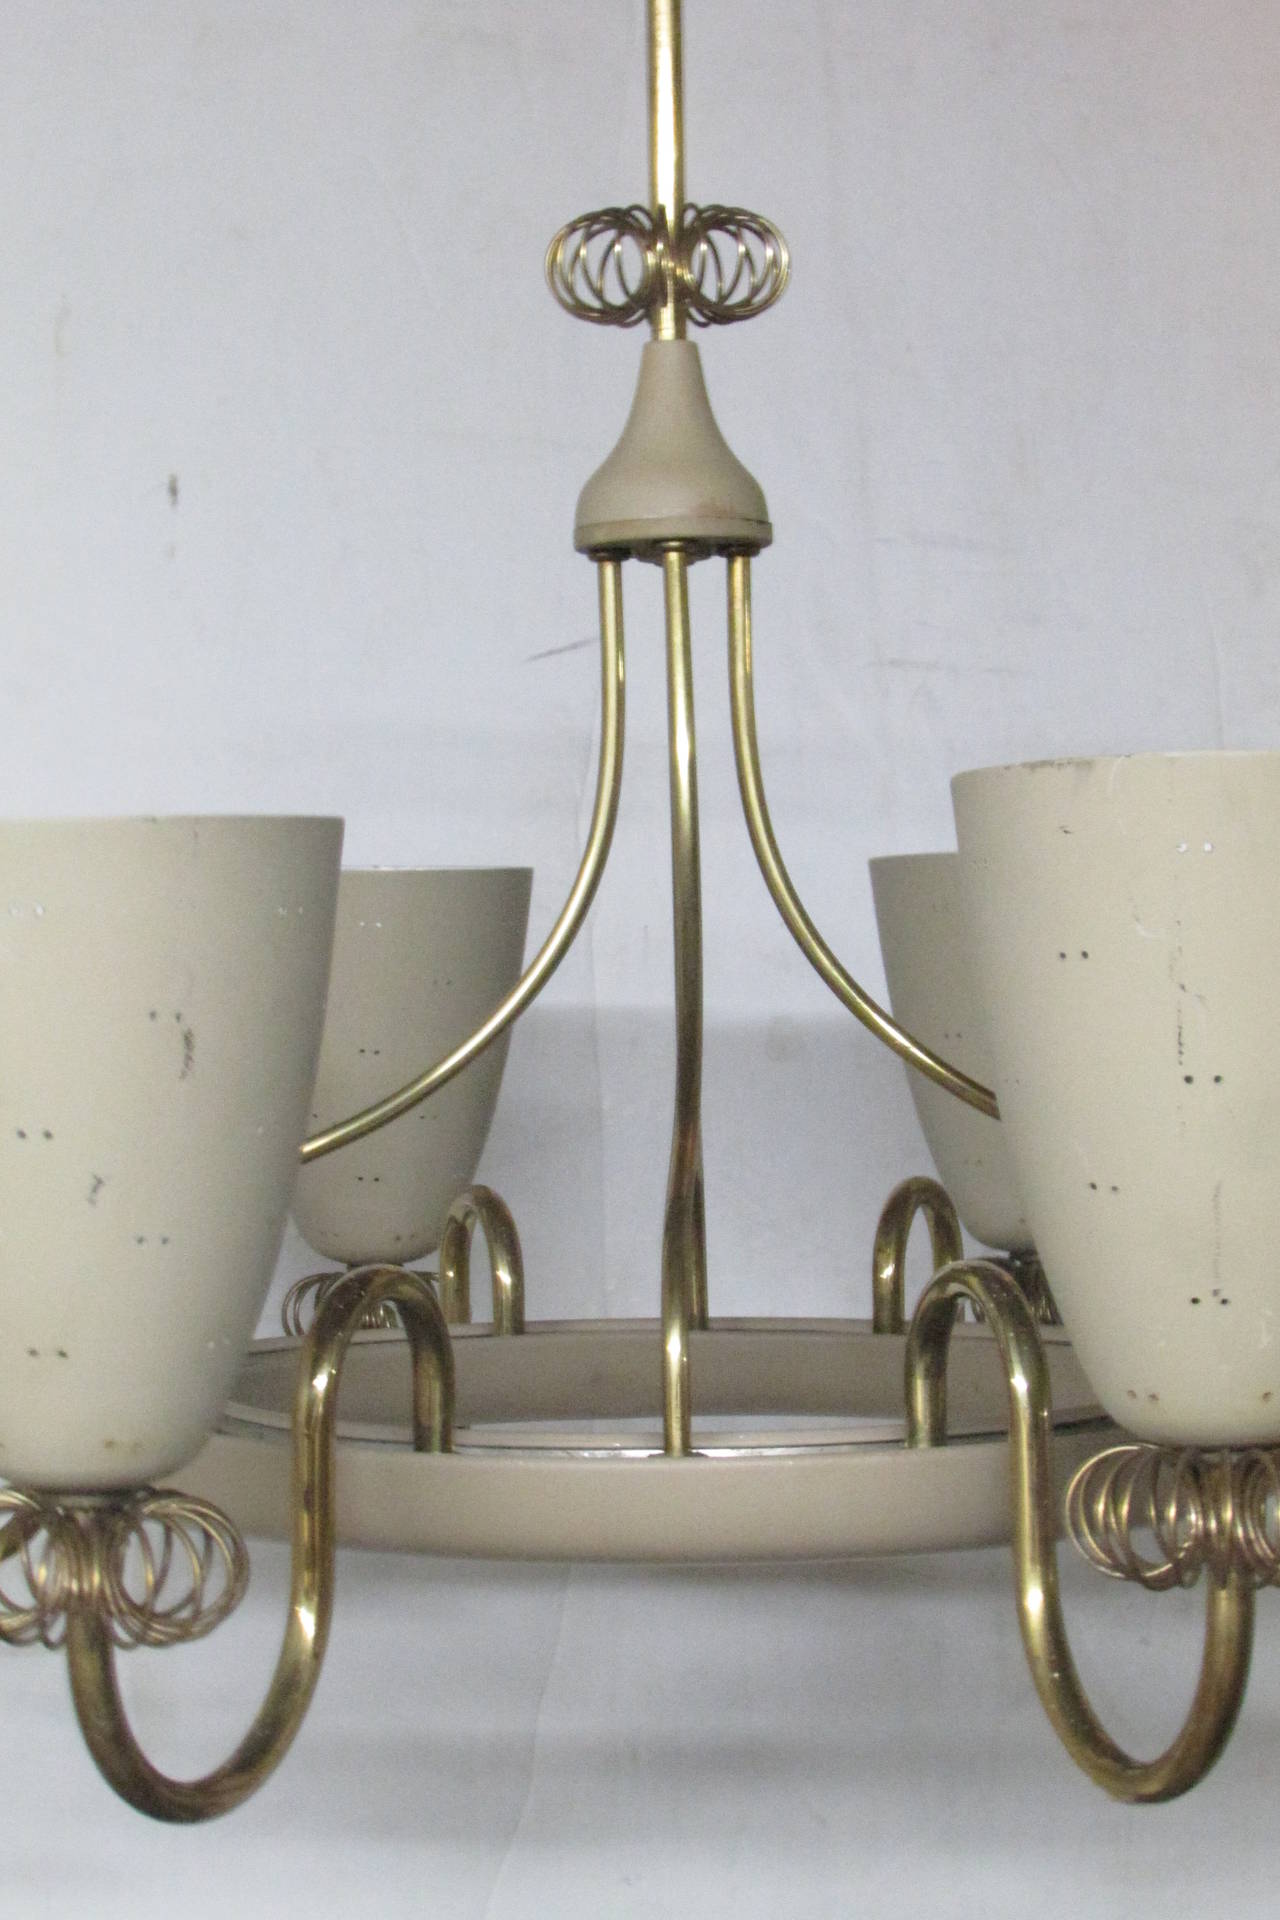 An eight-arm chandelier by Lightolier (stamped on inside metal ring - Canada) in original dry cream white enamel painted metal and brass. Measures 26 inches across by 17 inches high to central brass spiral decoration and approximately 32 inches high